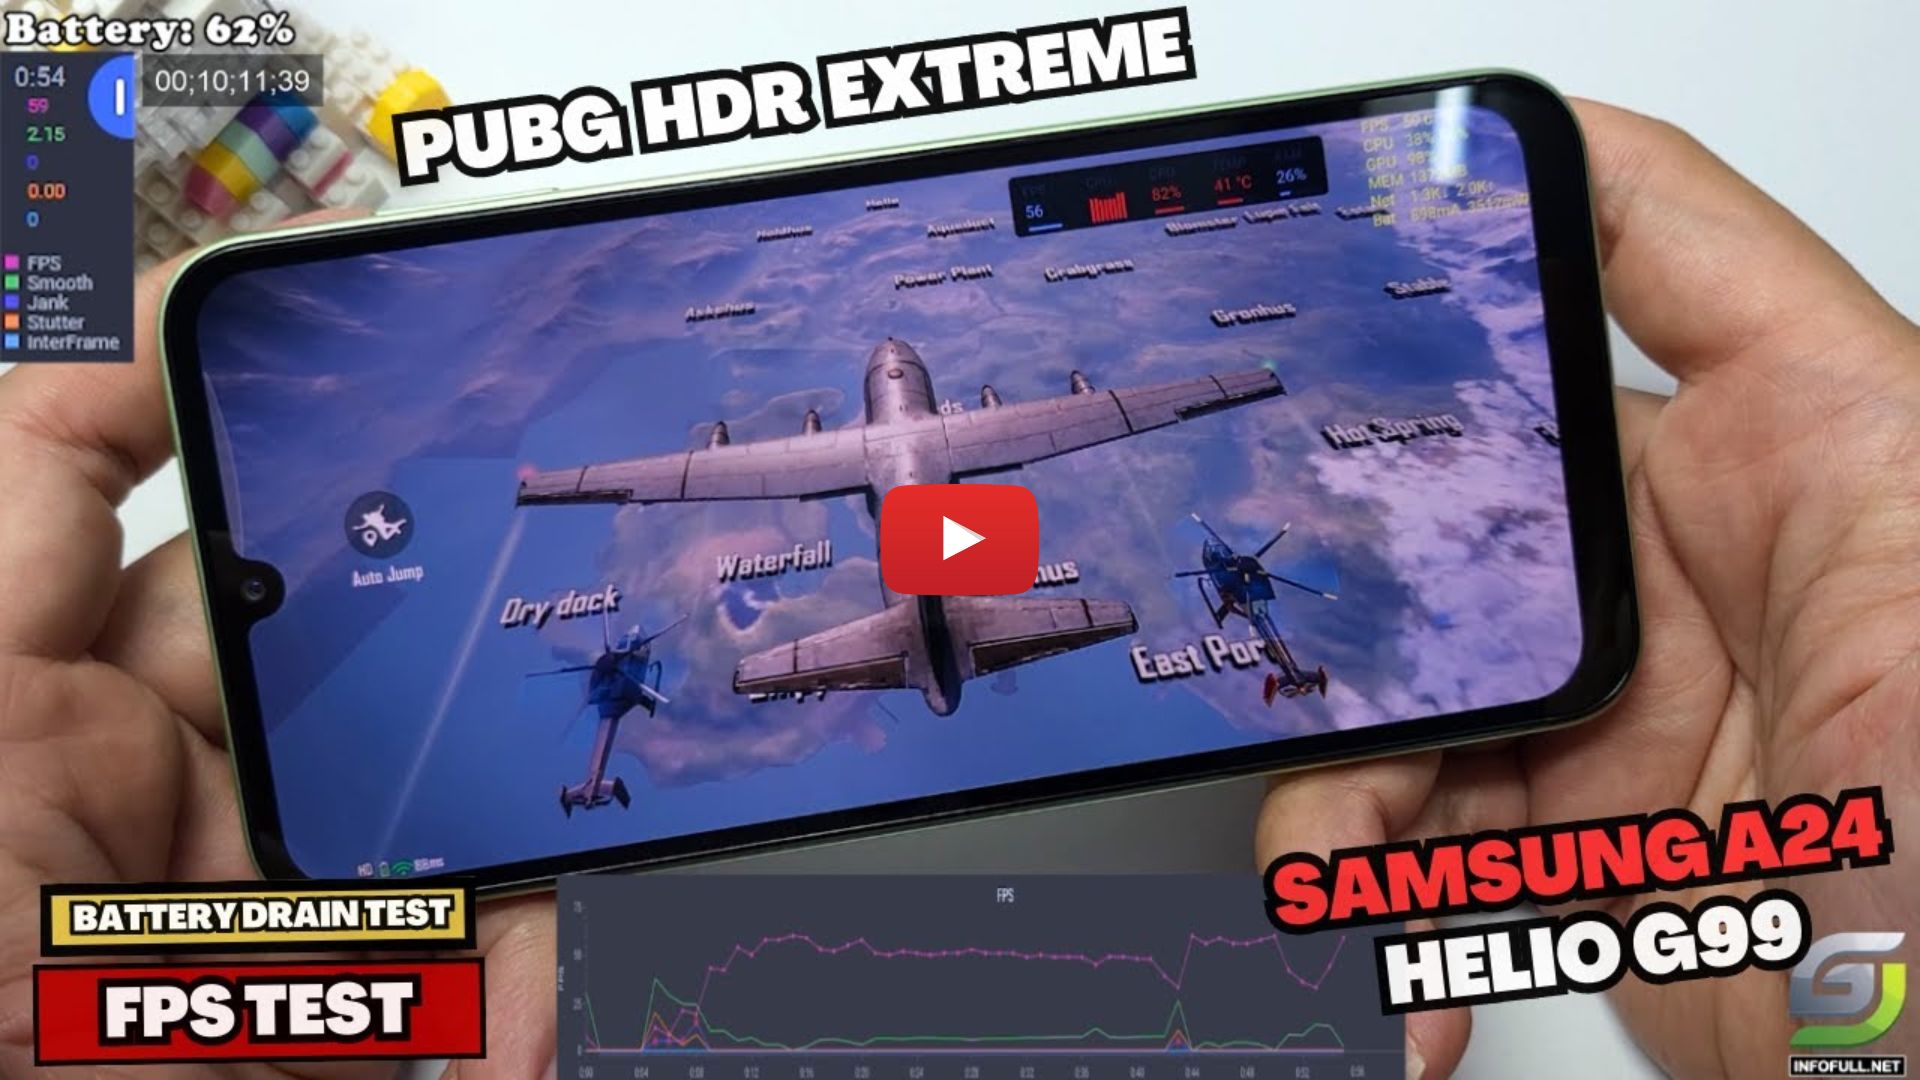 Mondstuk Gom Vergevingsgezind Samsung Galay A24 test game PUBG Mobile Max Setting | HDR Extreme Graphic -  GSM FULL INFO %